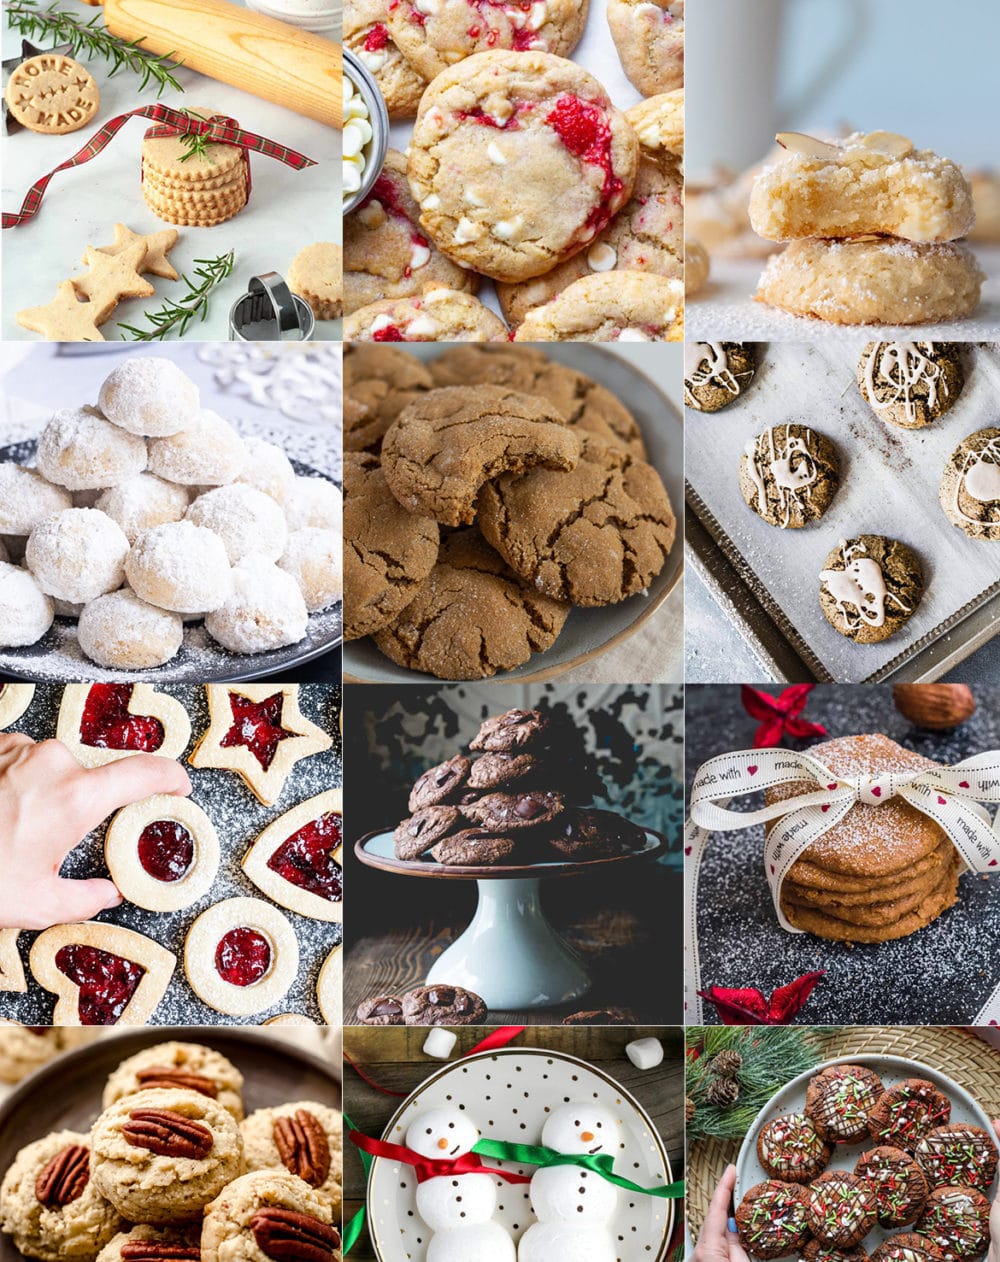 12 images of different kinds of Gluten Free Christmas Cookies